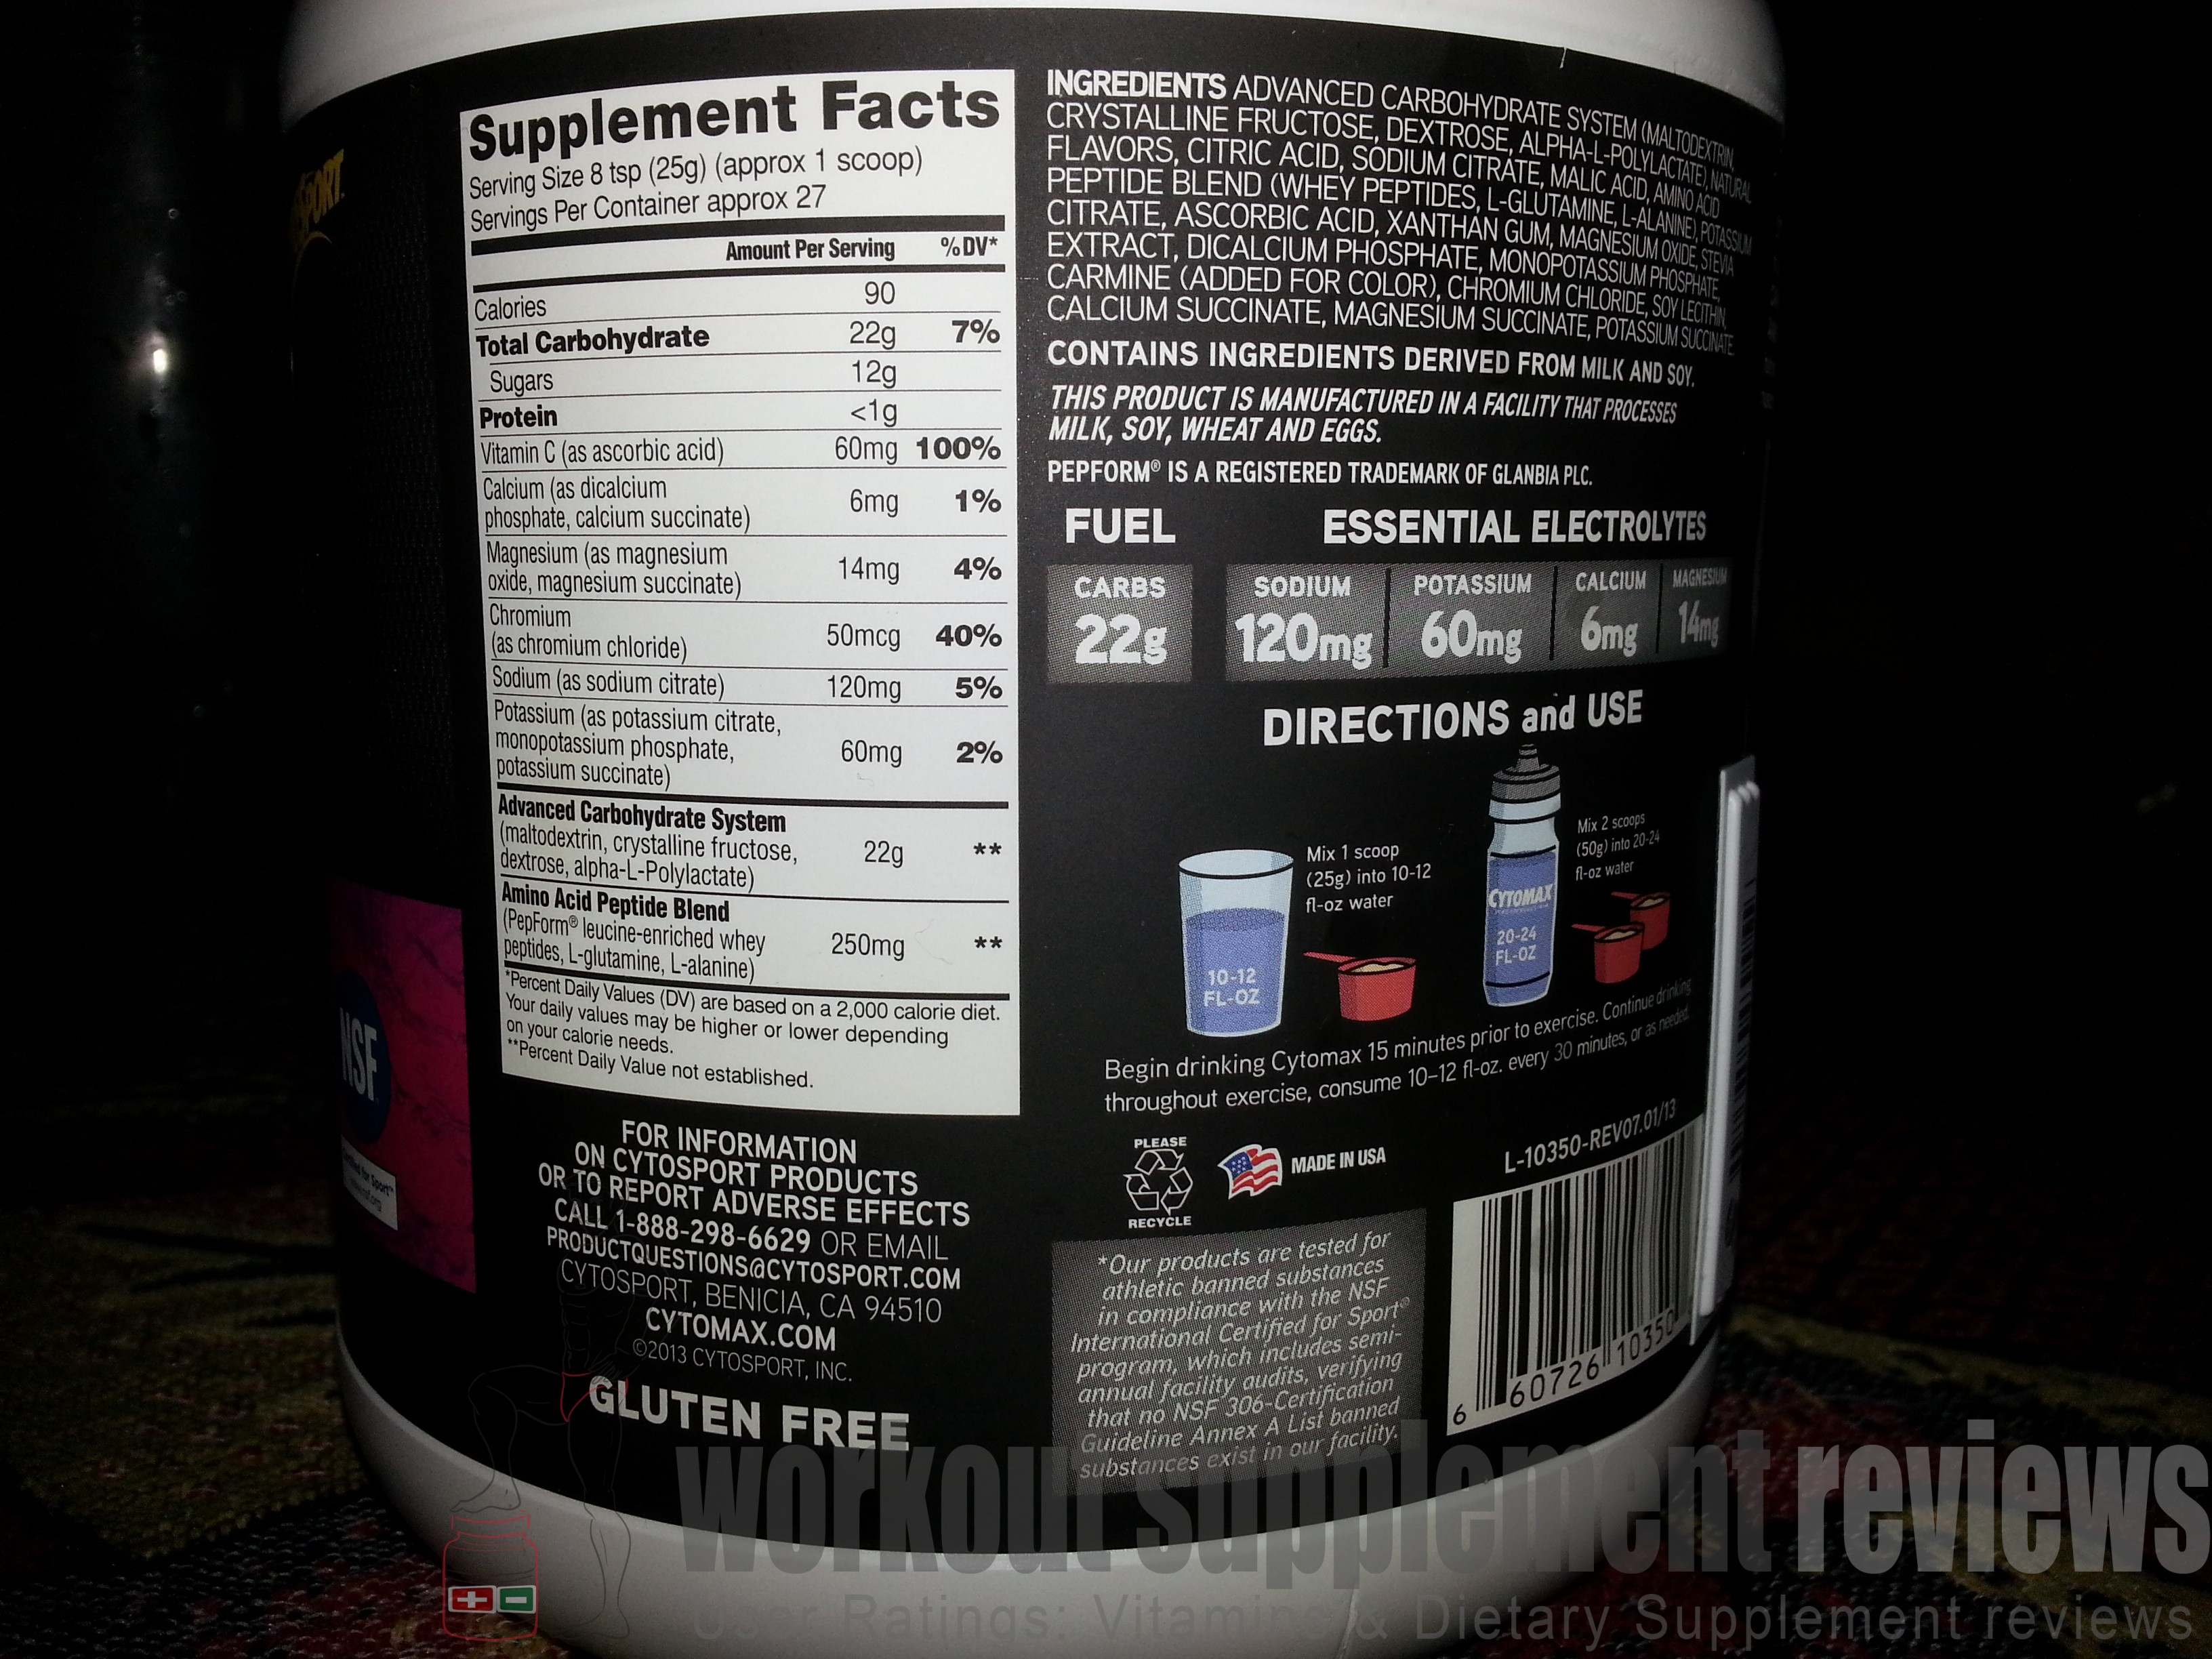 Cytomax supplement facts.